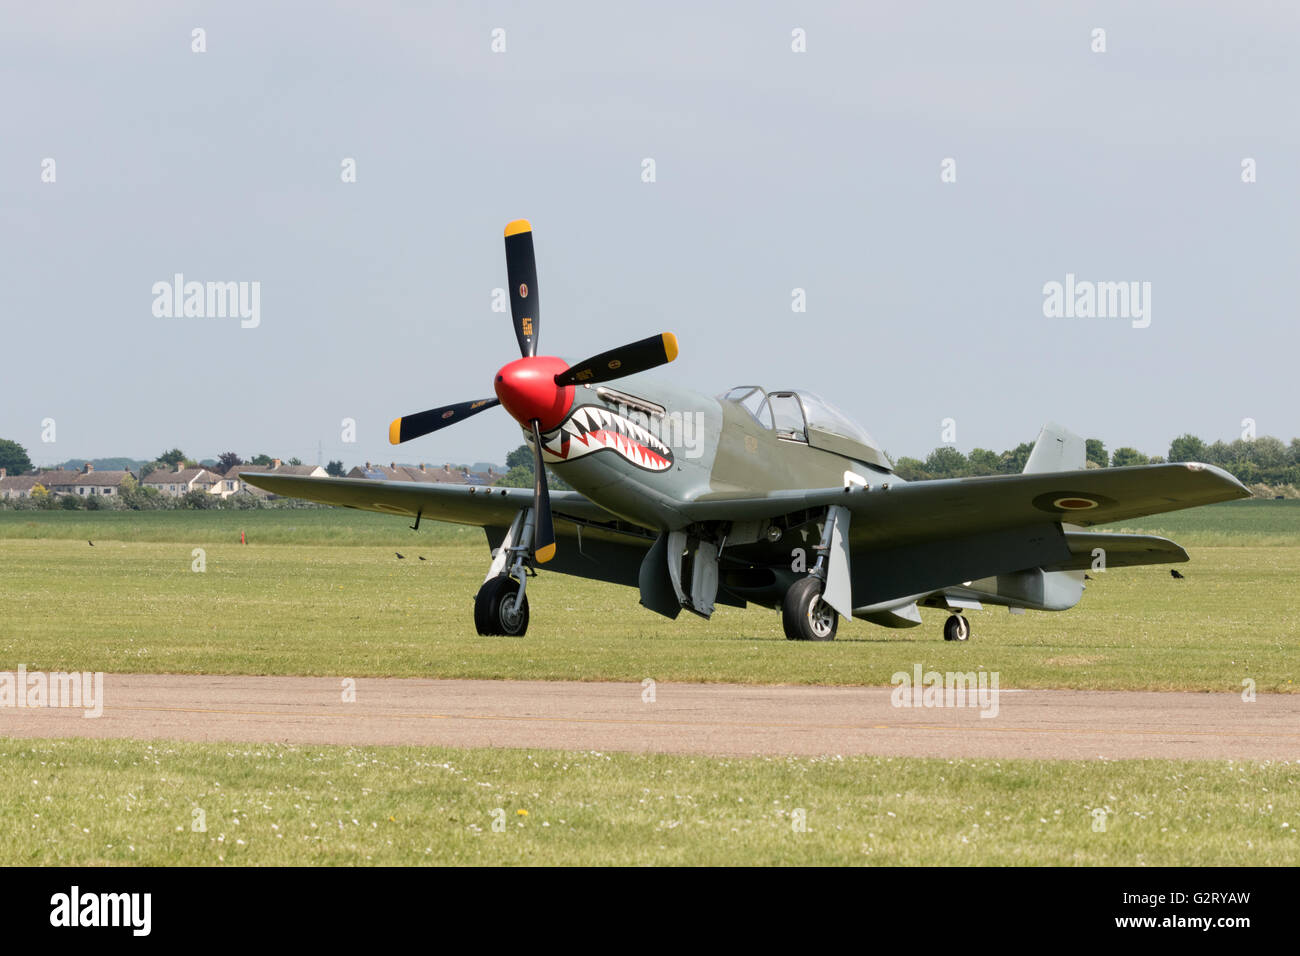 North American P-51D Mustang fighter plane on the ground at Duxford Airport, Cambridge UK Stock Photo